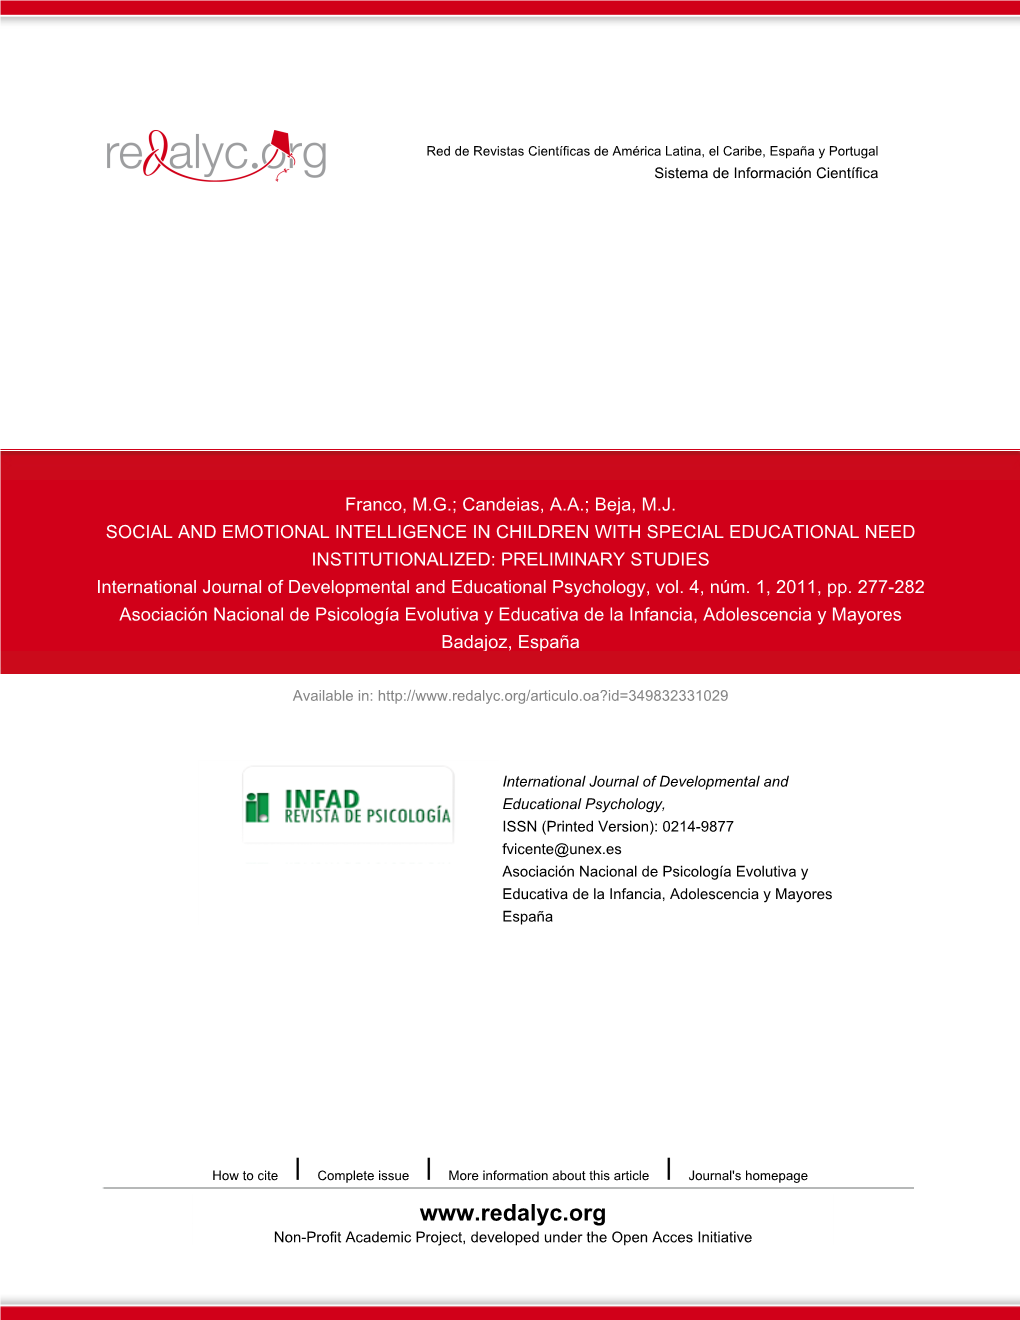 Redalyc.SOCIAL and EMOTIONAL INTELLIGENCE in CHILDREN with SPECIAL EDUCATIONAL NEED INSTITUTIONALIZED: PRELIMINARY STUDIES